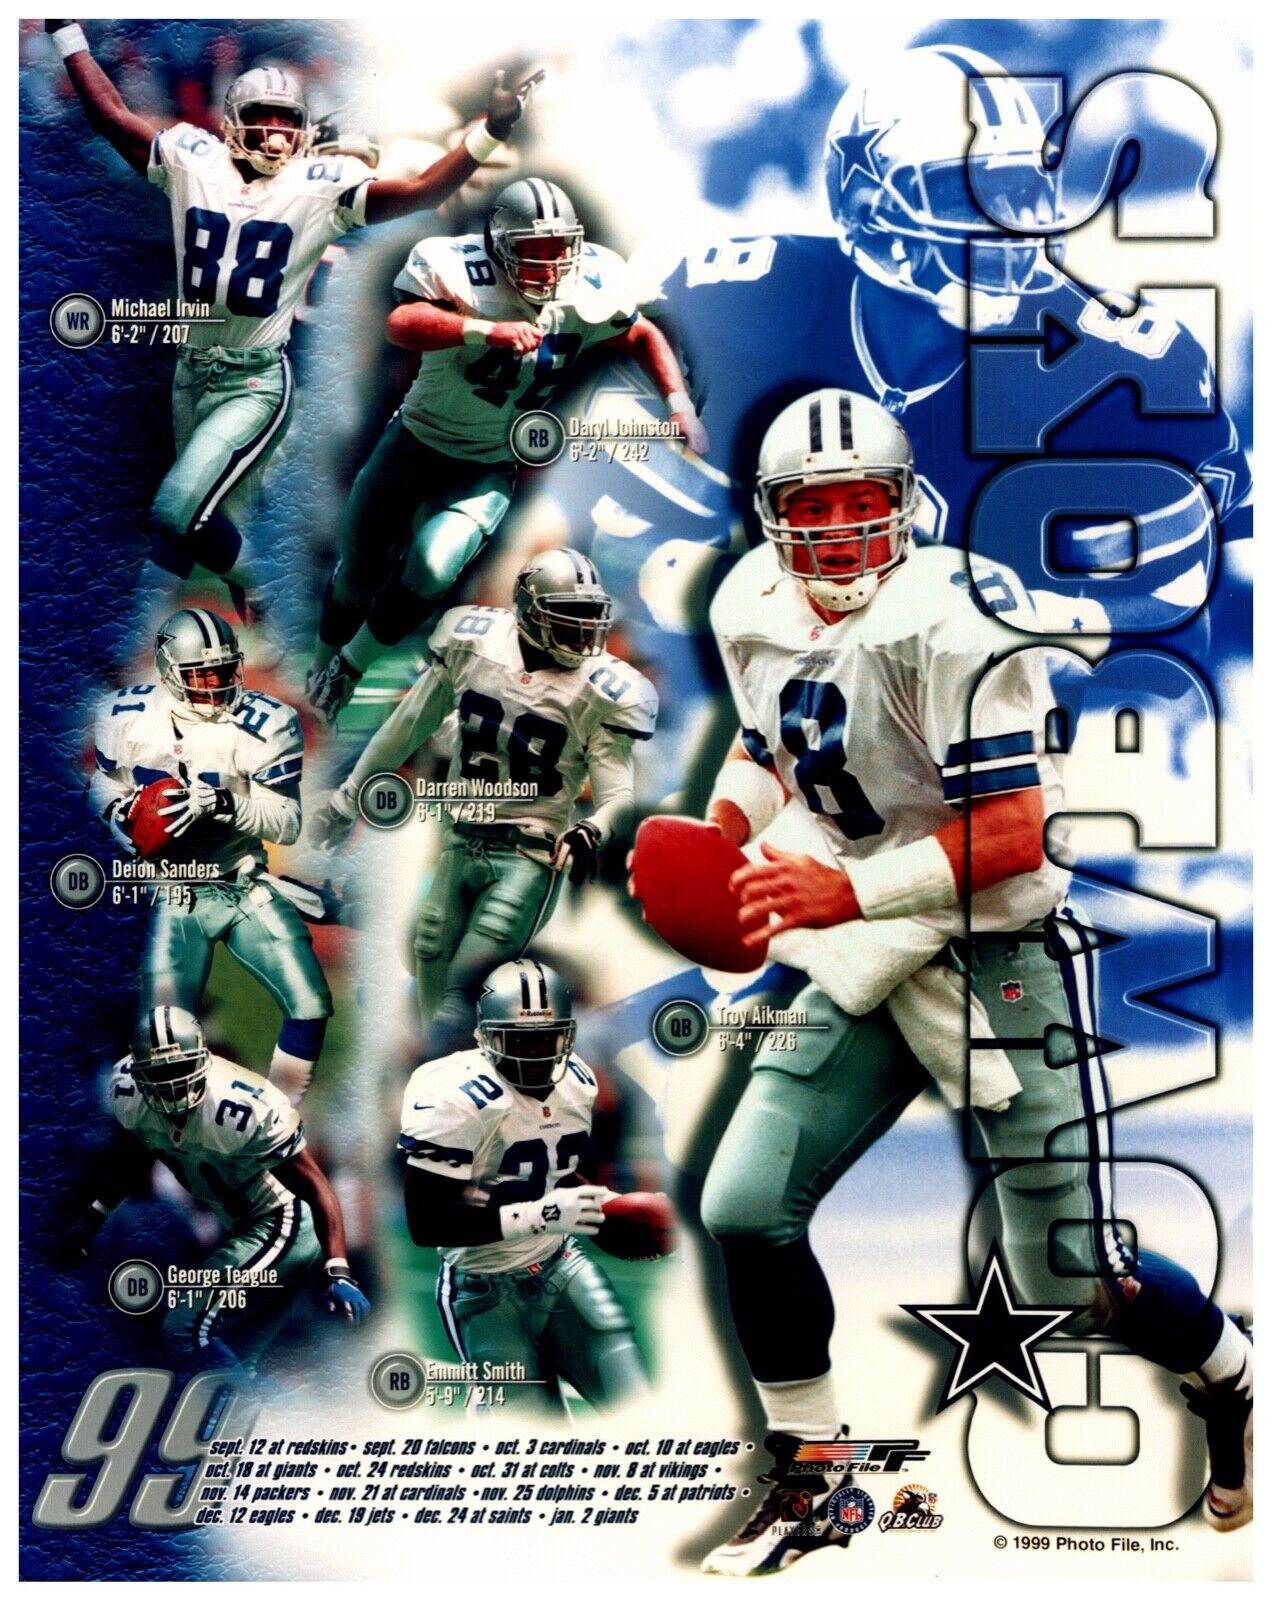 1999 Dallas Cowboys 8x10 Sports Photo A Unsigned Featuring Troy Aikman